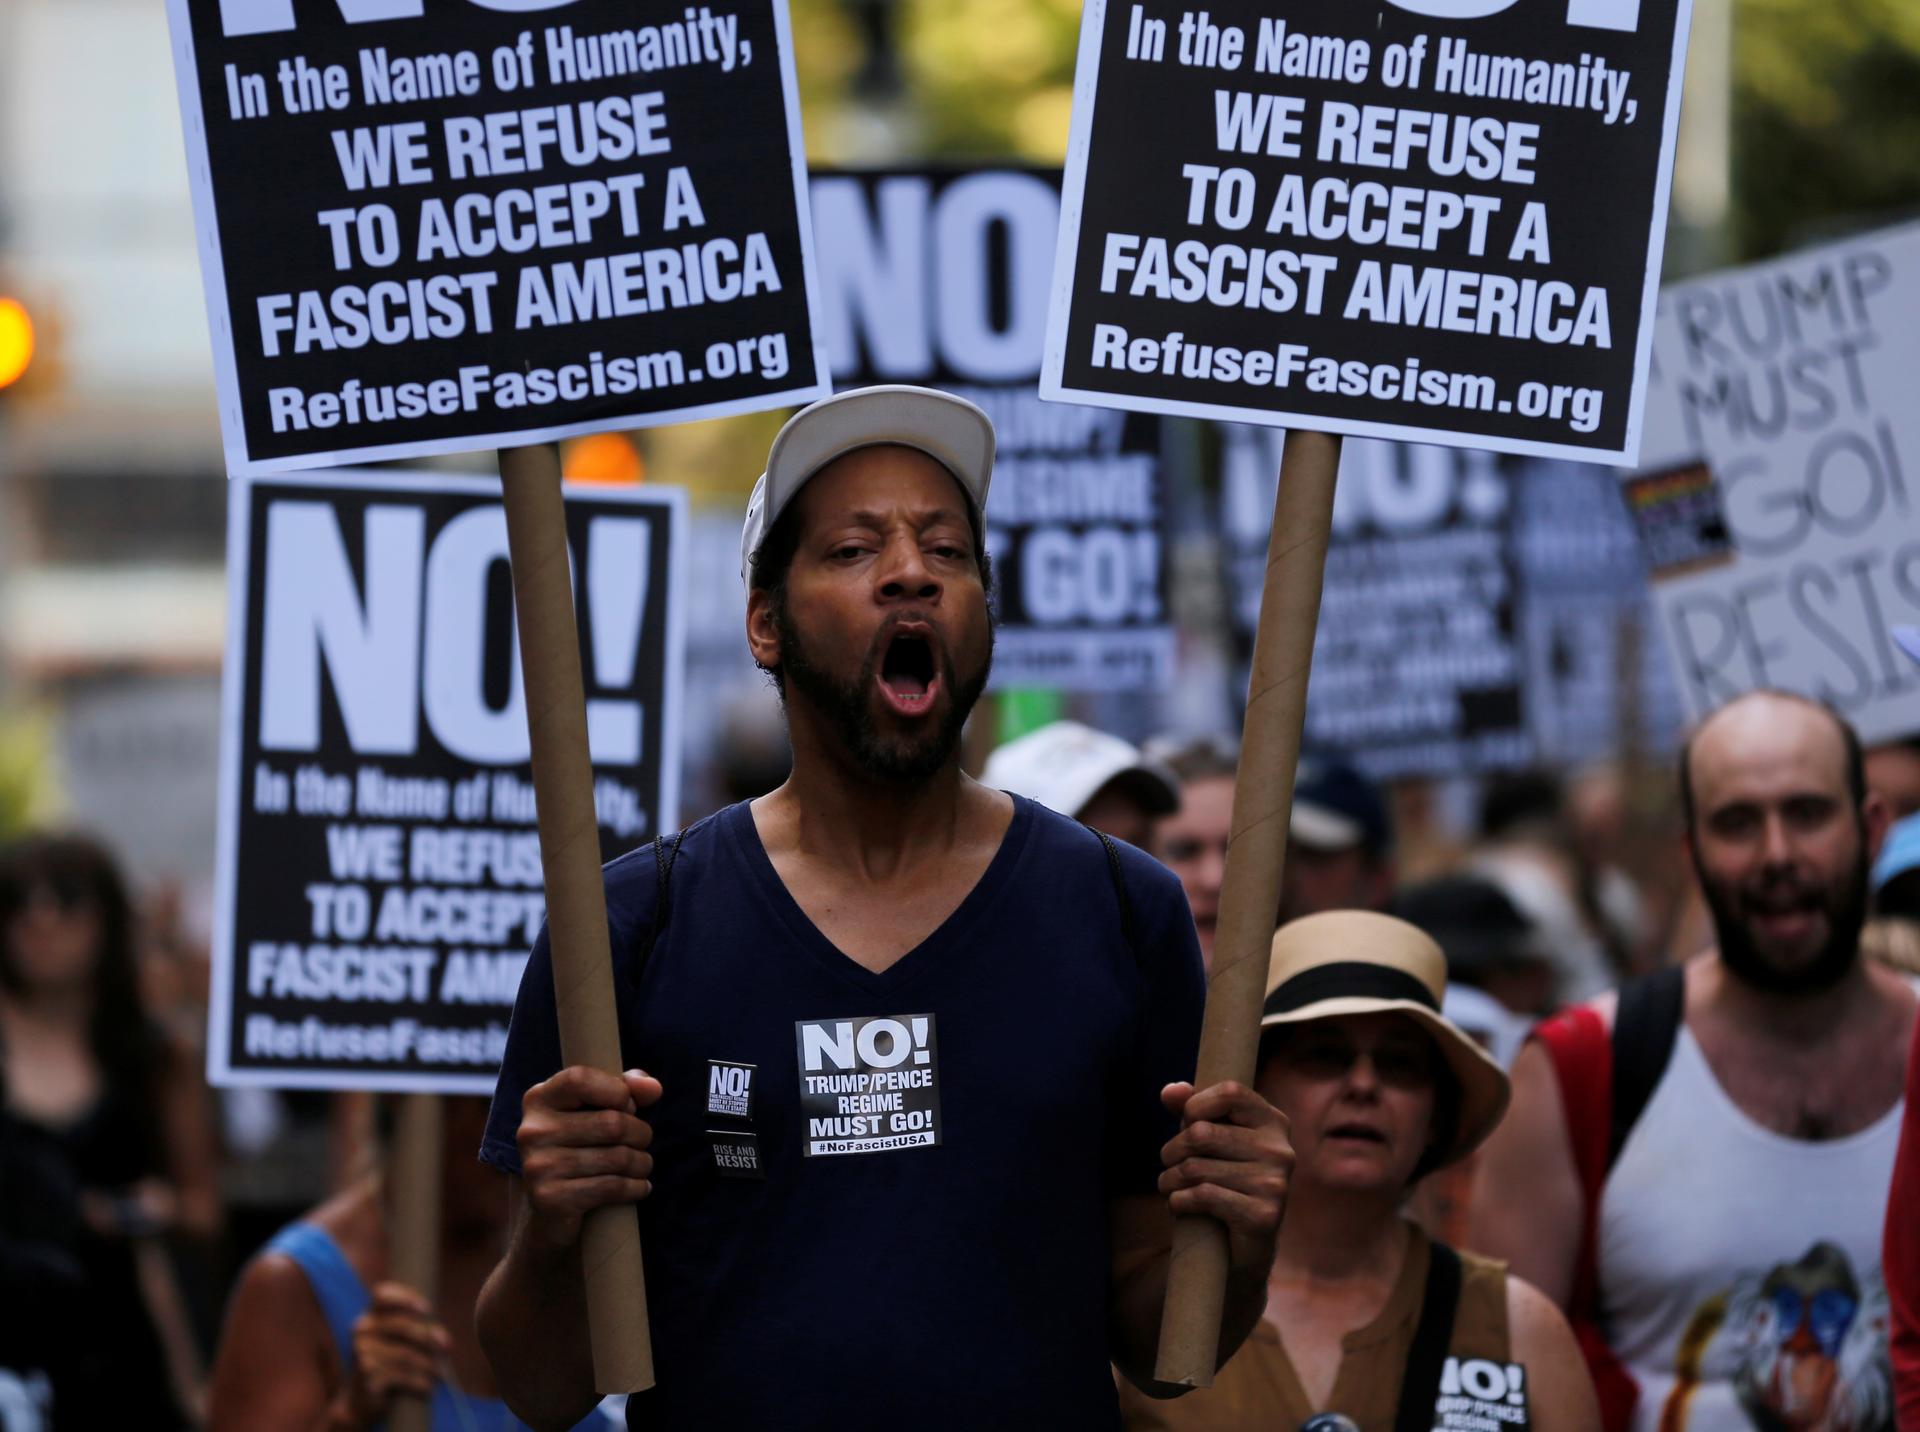 A protester shouts slogans at a protest against white nationalism in New York City